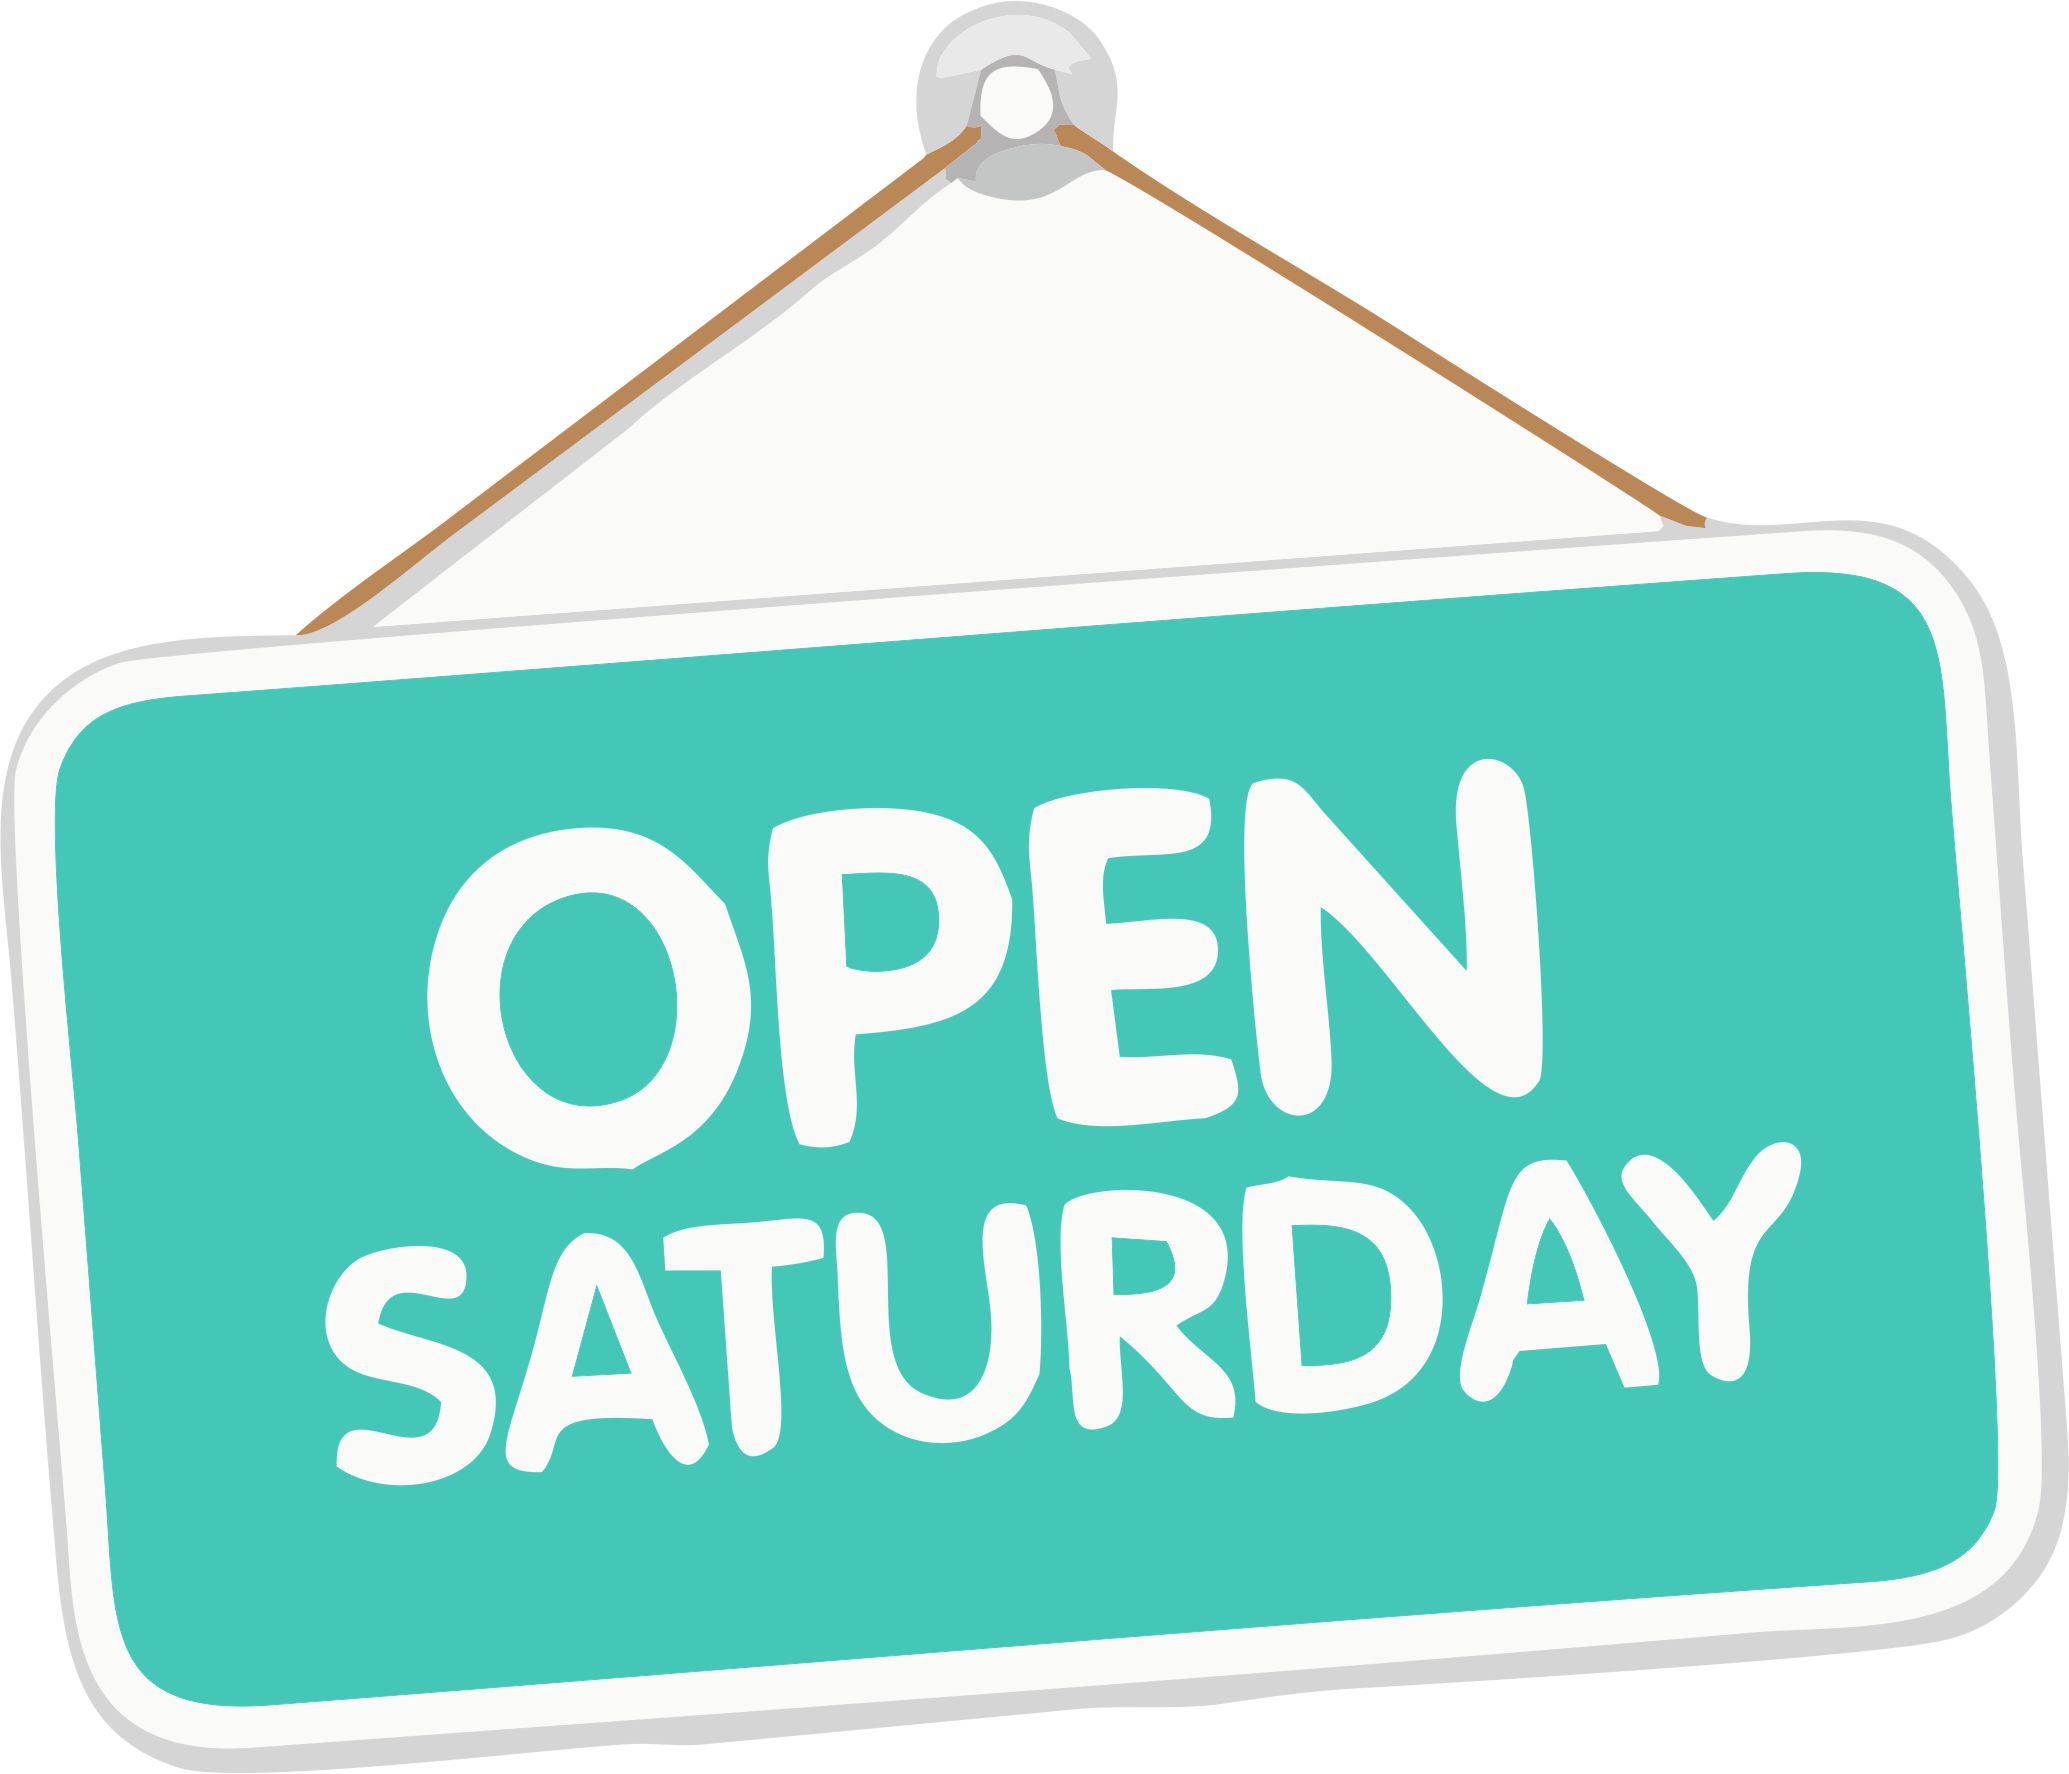 Image result for saturday open